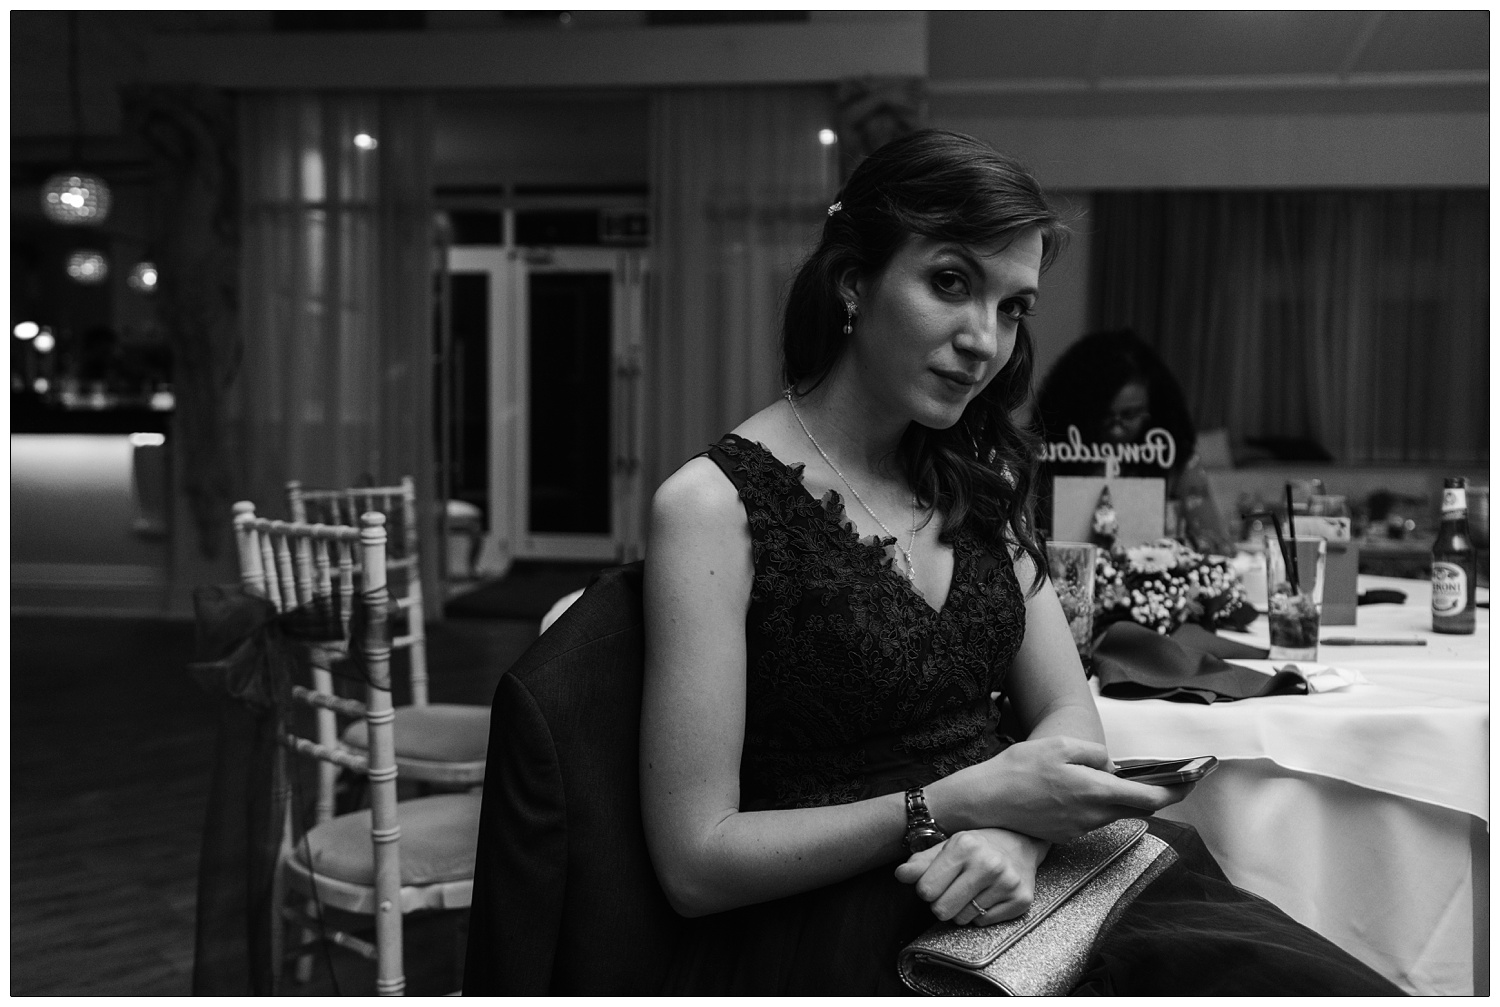 Bridesmaid at a wedding late at night, she's sat at a table checking her phone and looks up at the camera. A candid style wedding photograph.